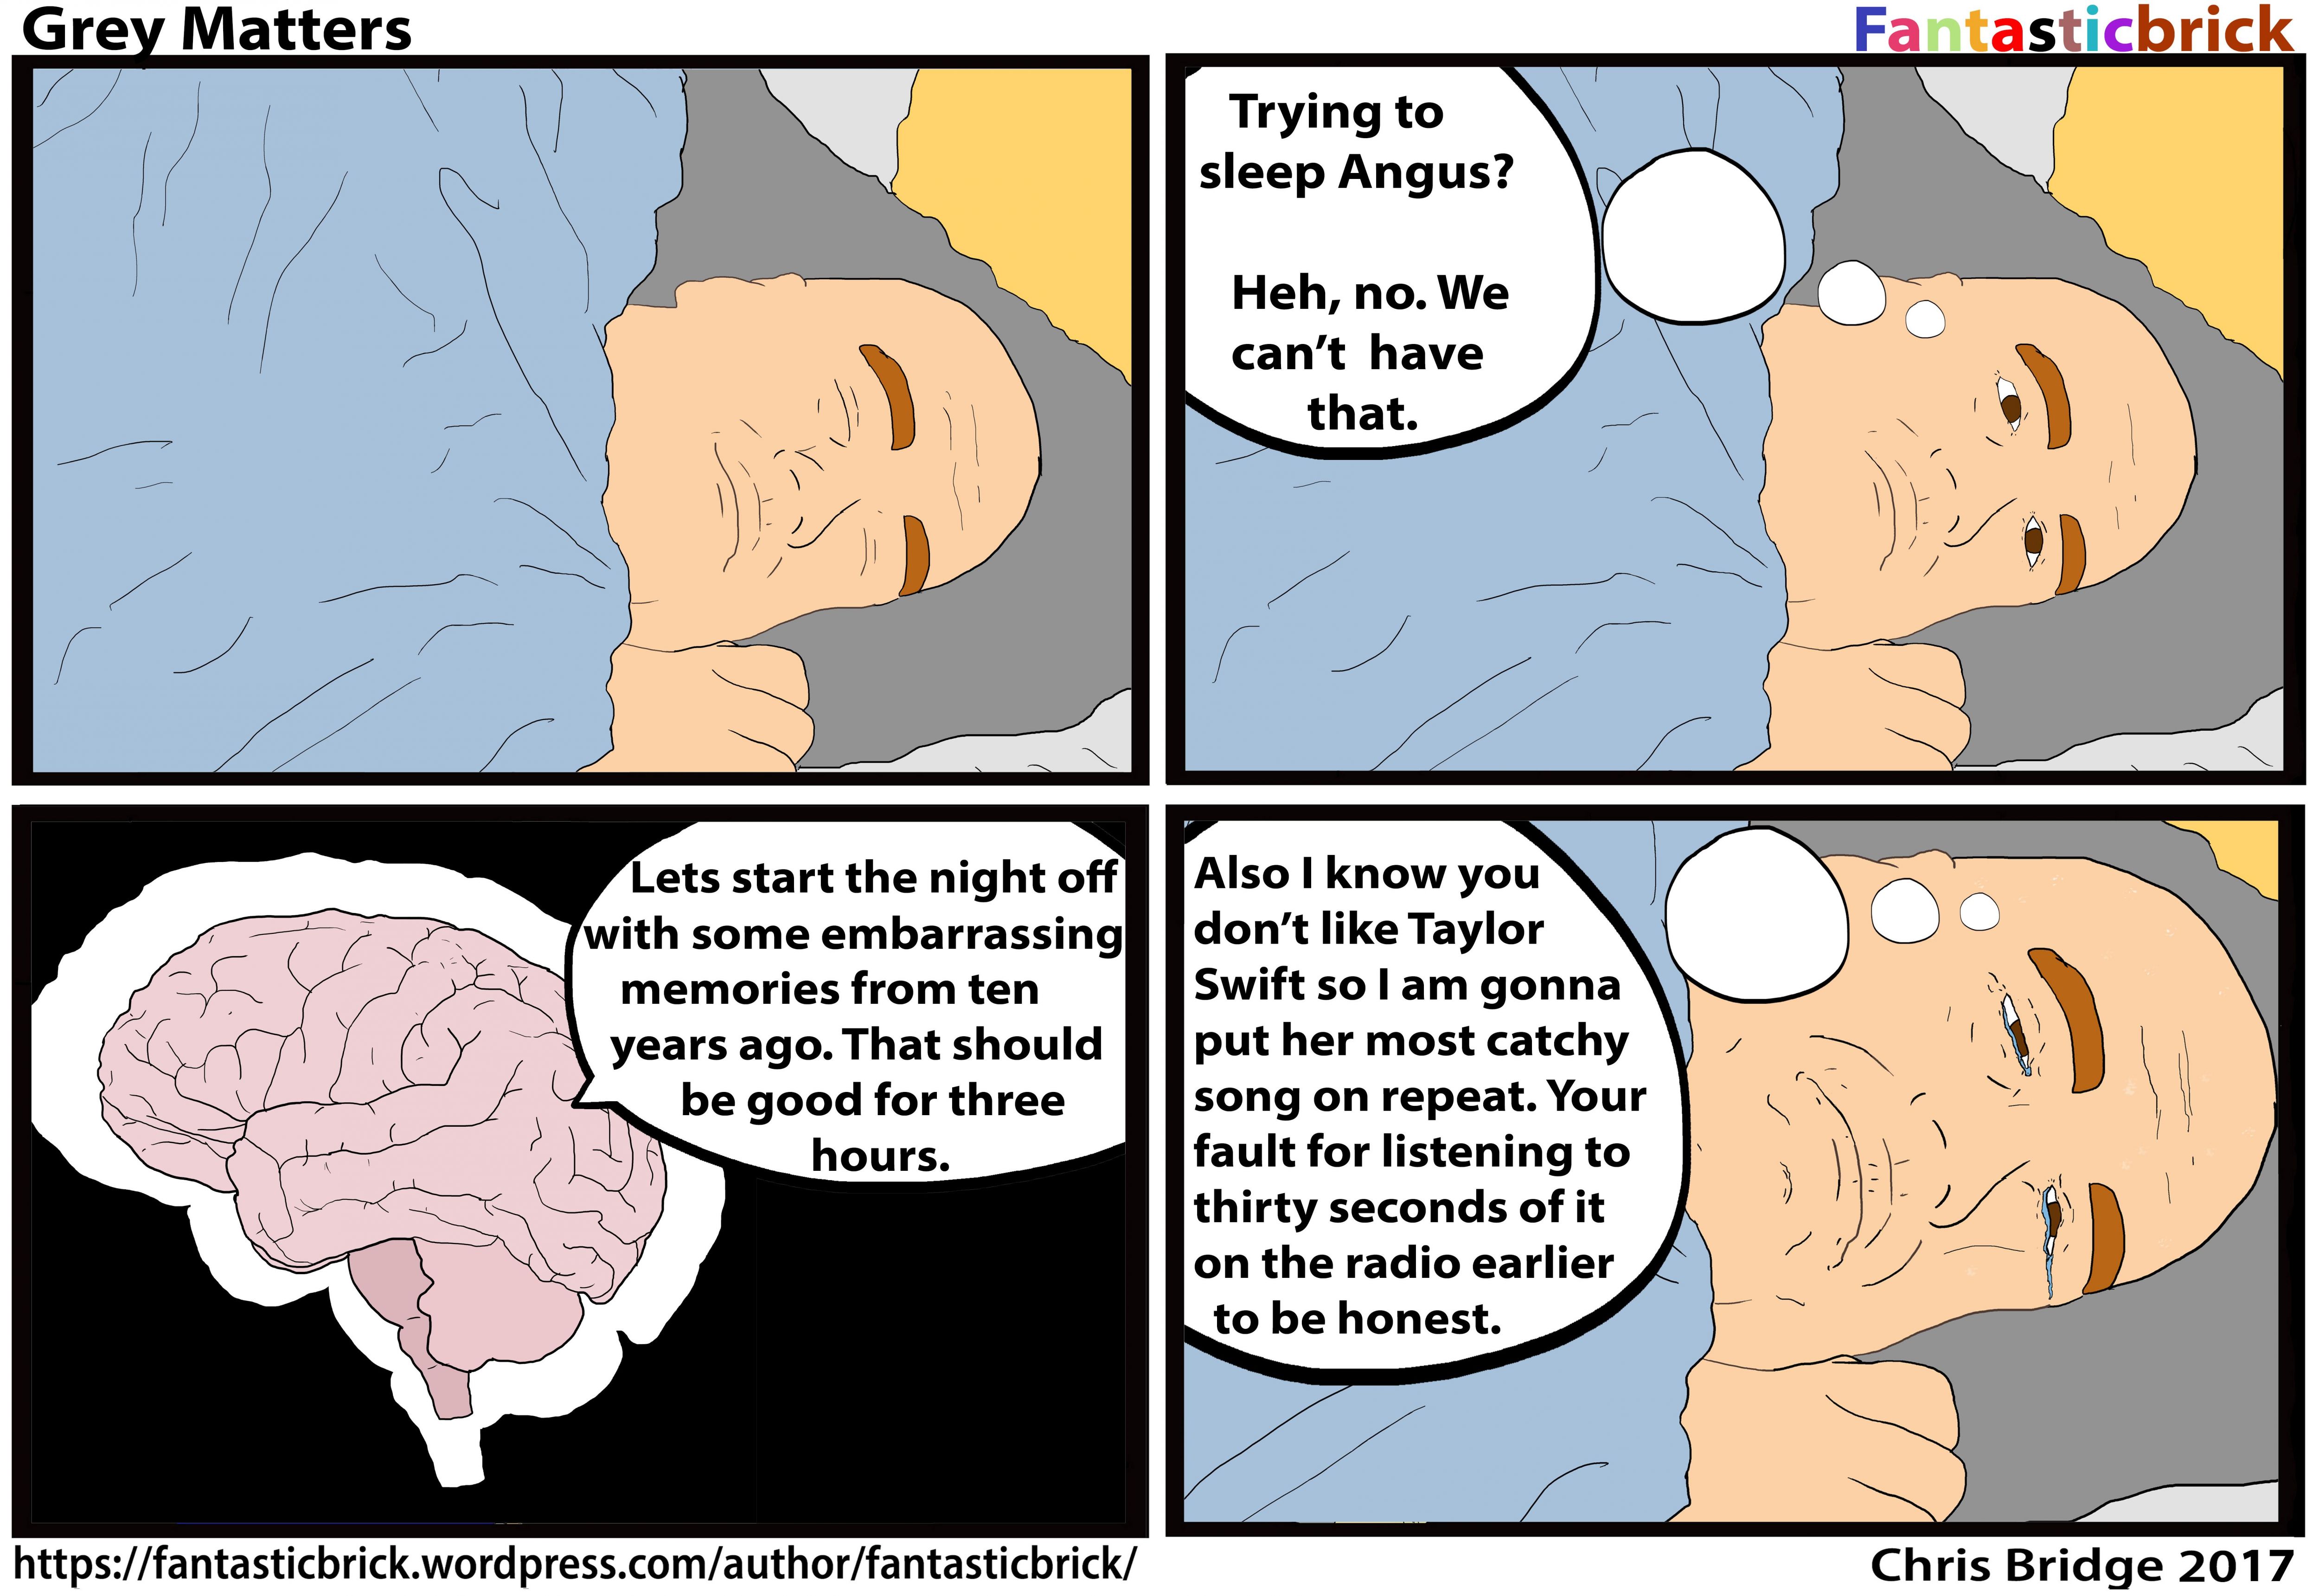 Grey Matters - A Comic About Trying To Sleep